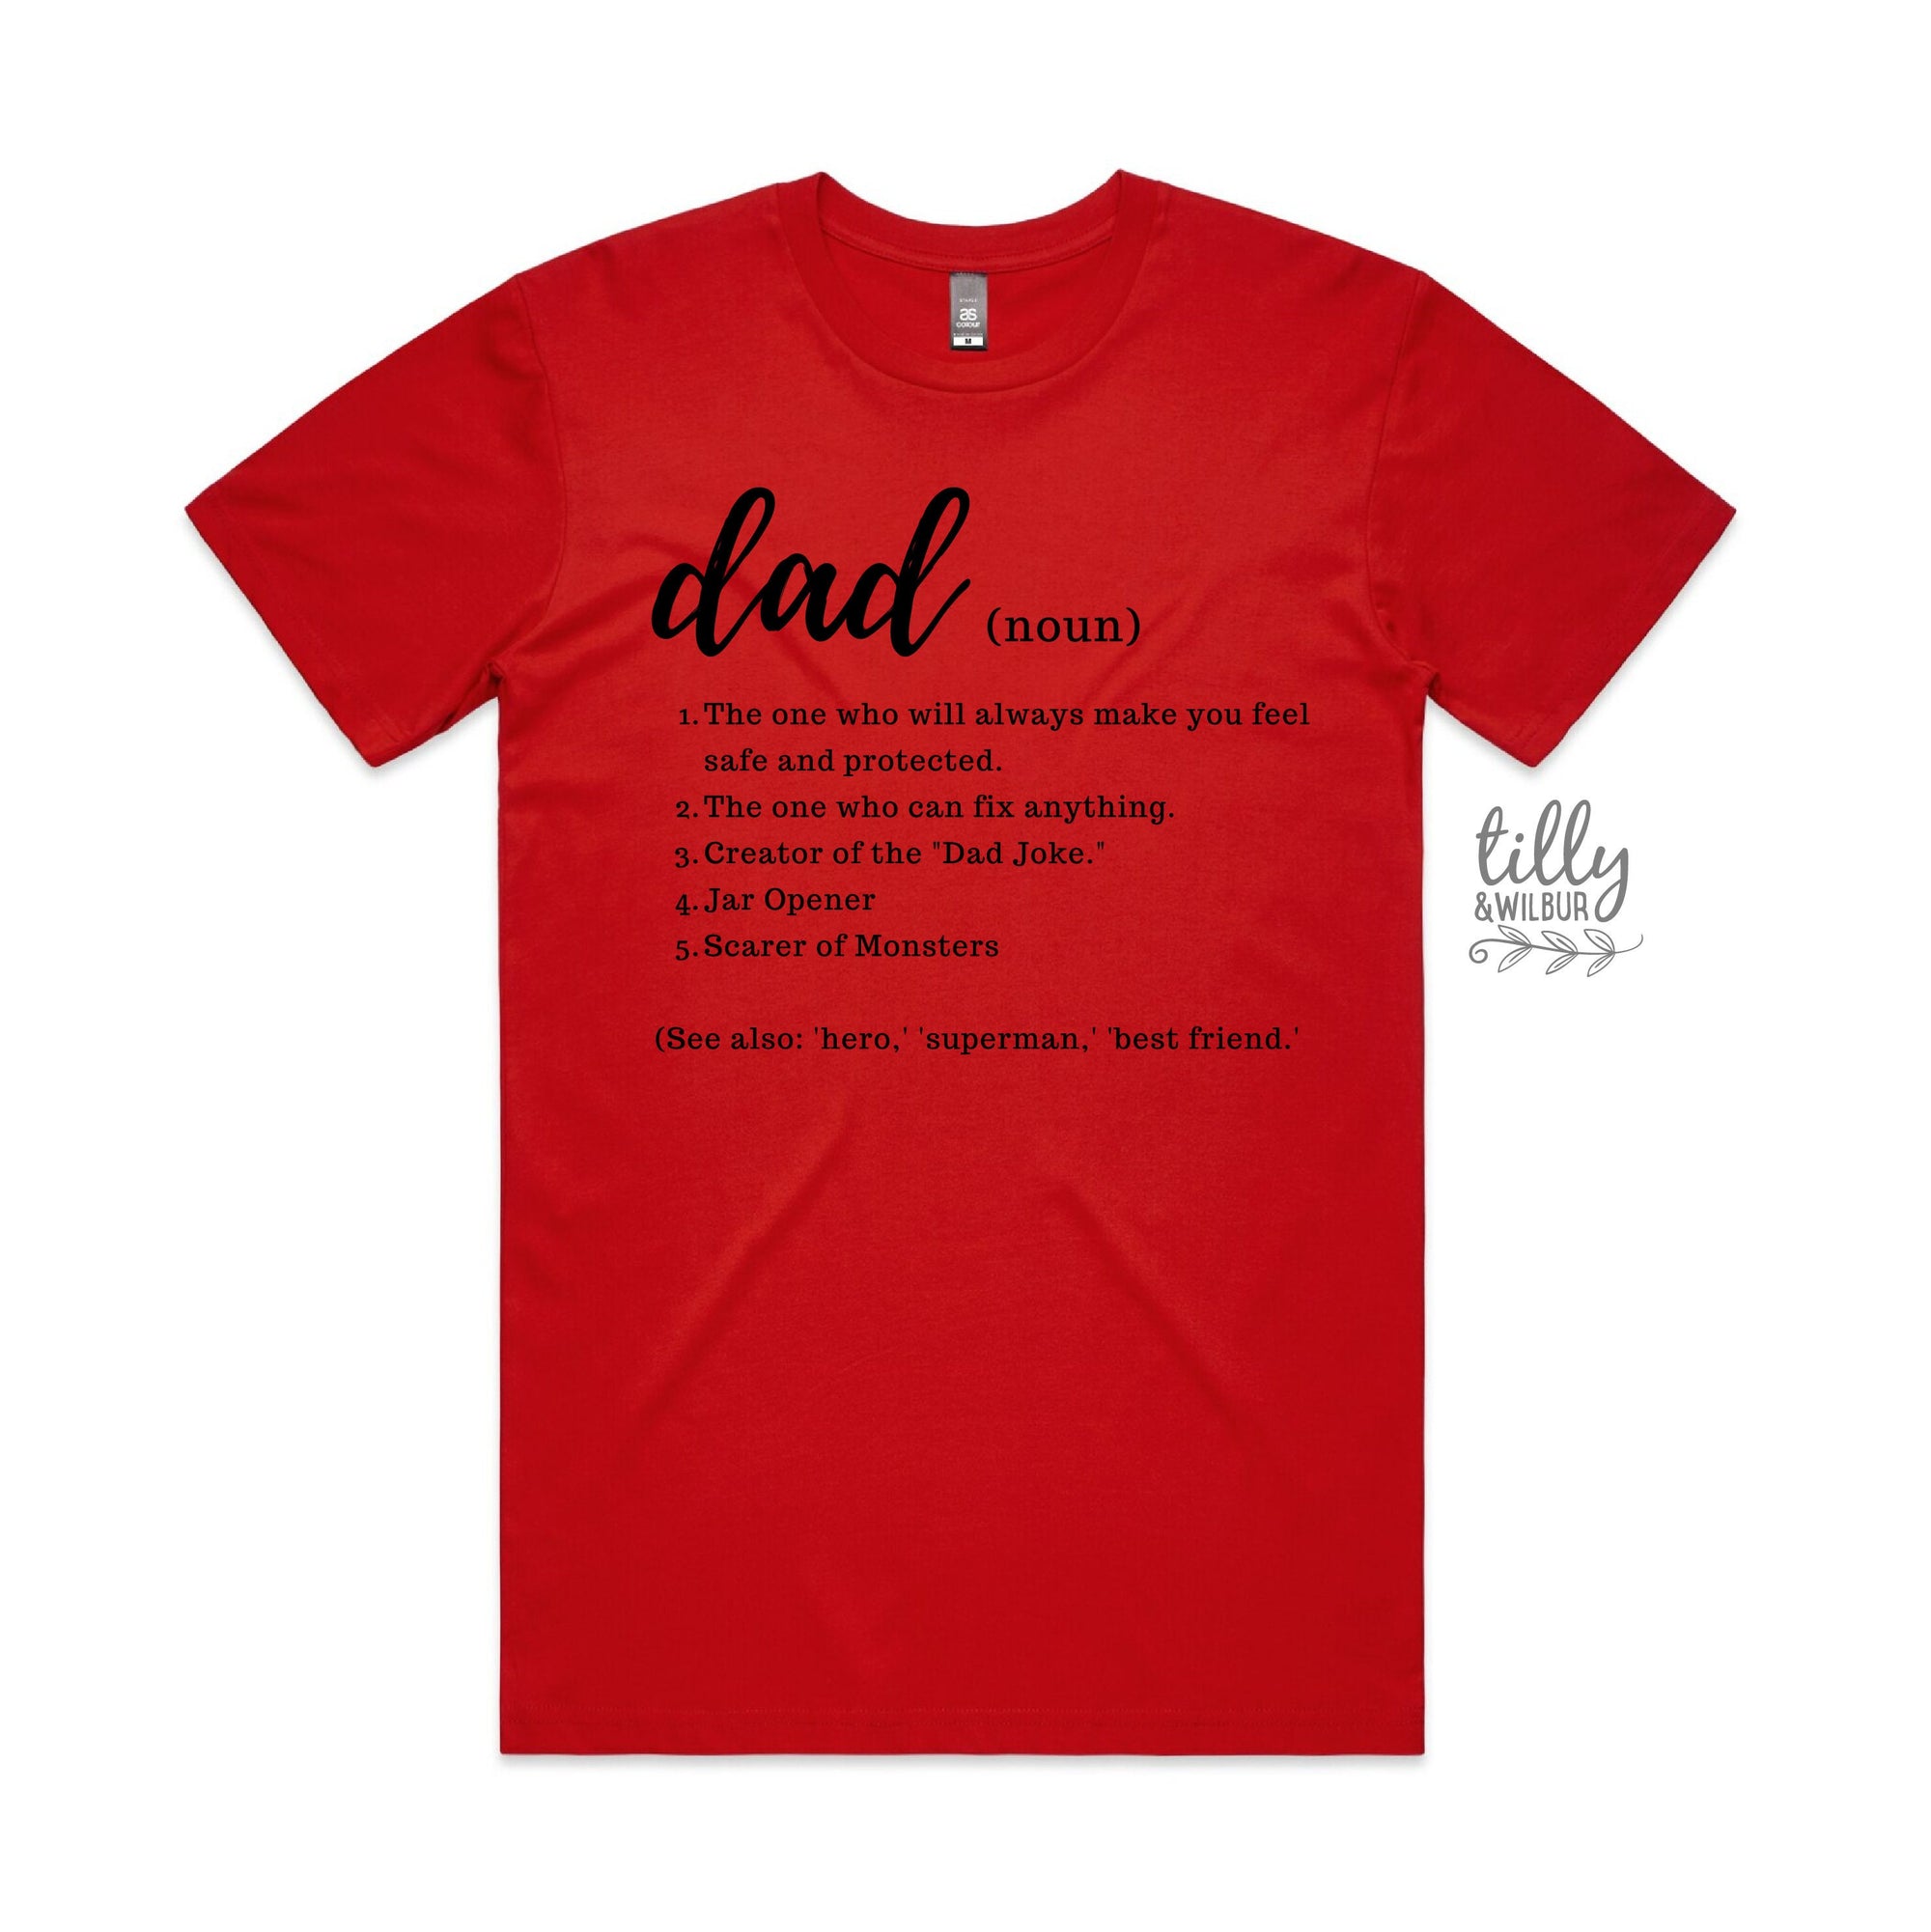 Dad Definition T-Shirt, Father's Day Gift, Dad T-Shirt, T-Shirt For Dad, Husband Gift, Dad Gift, New Dad Gift, Gift For Dad, Best Dad Ever